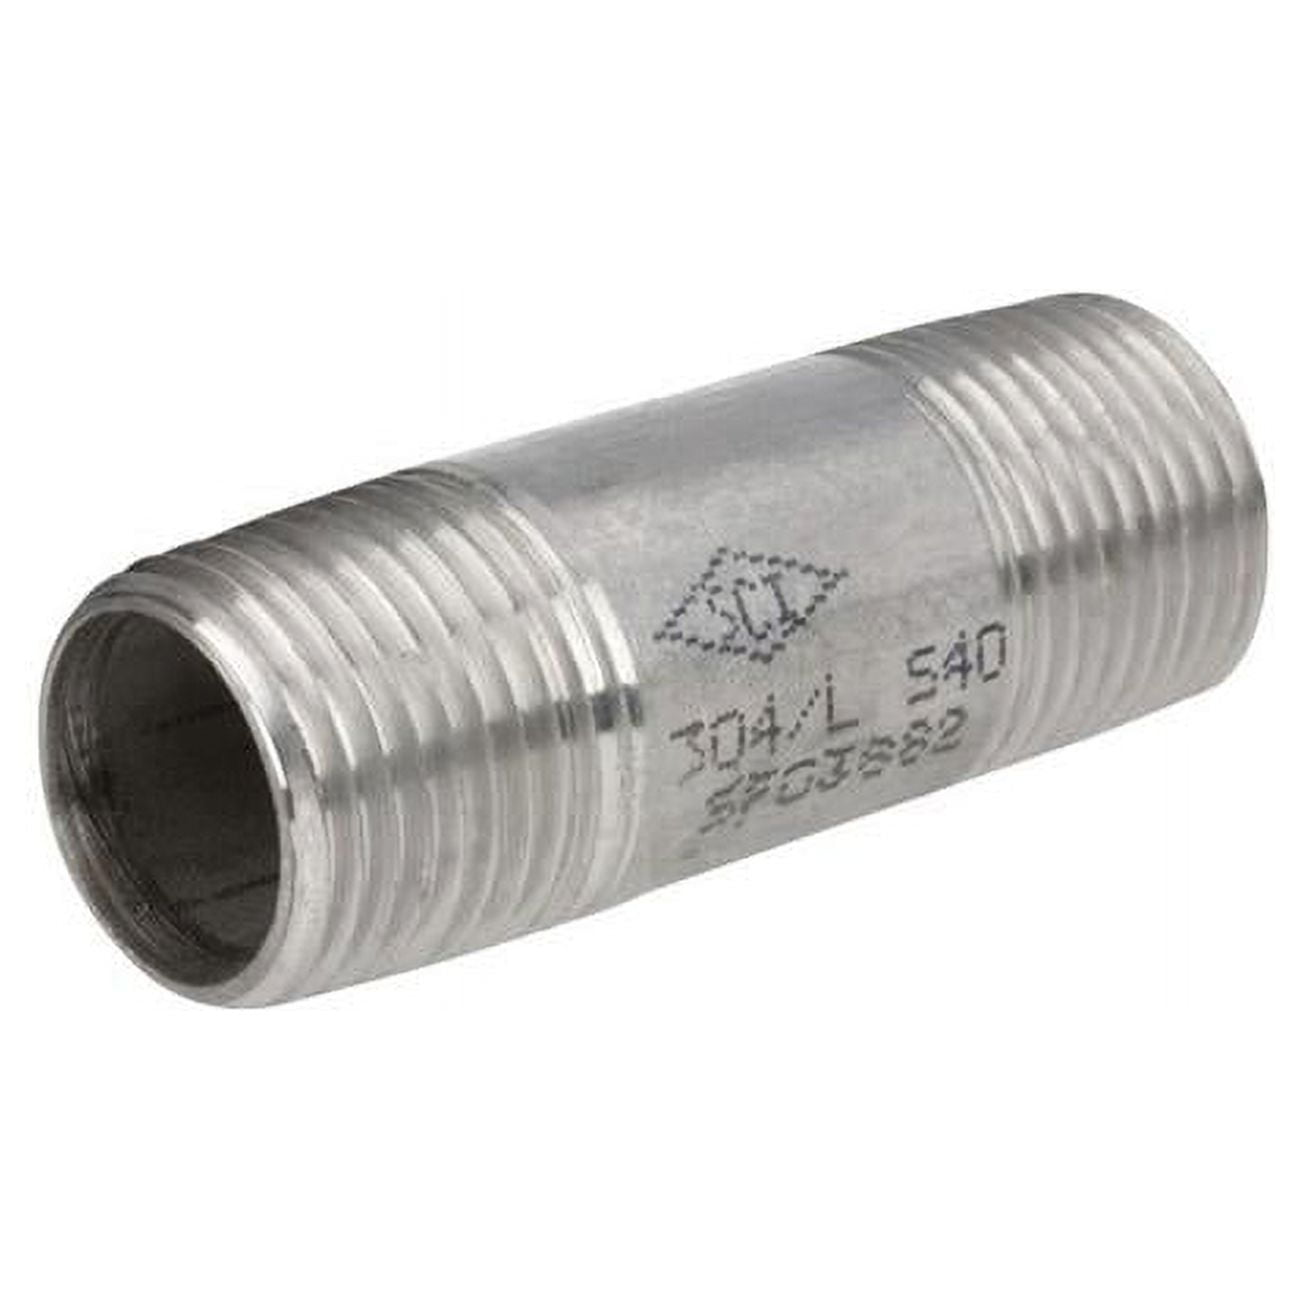 4809927 Stainless Steel Pipe Nipple - 1 In. X 1 Dia. X 3 In.